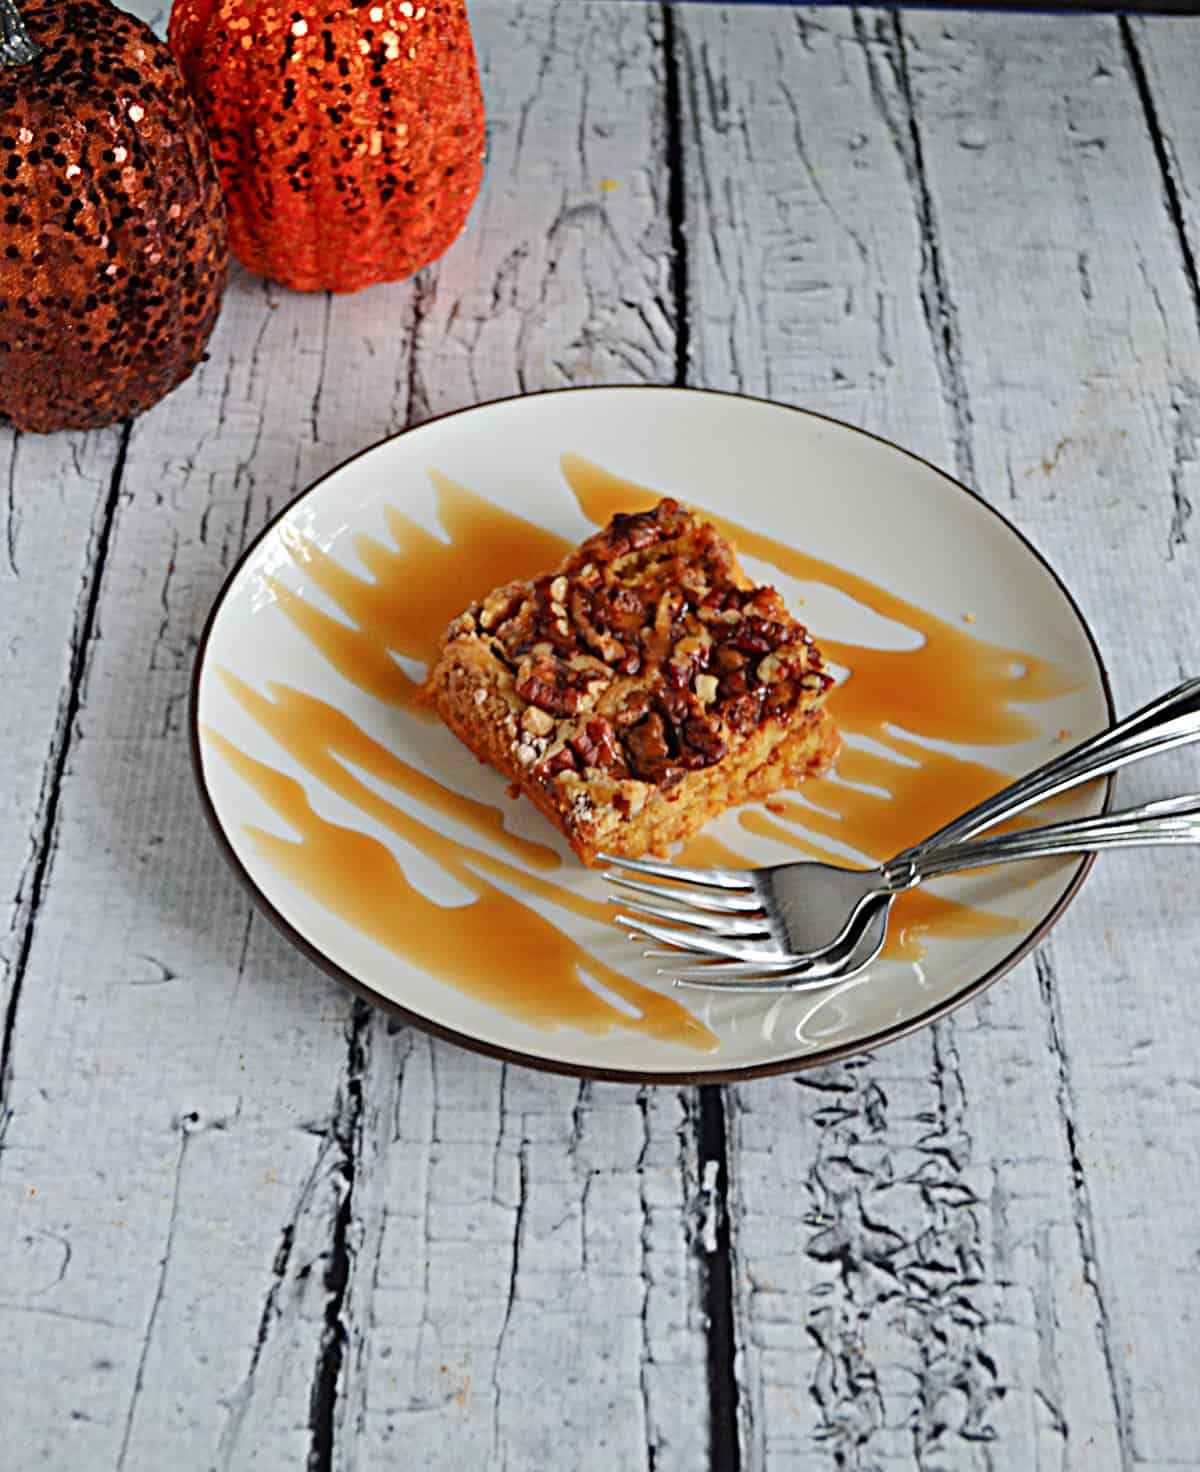 A plate with a slice of pumpkin cake with a caramel drizzle and two forks.